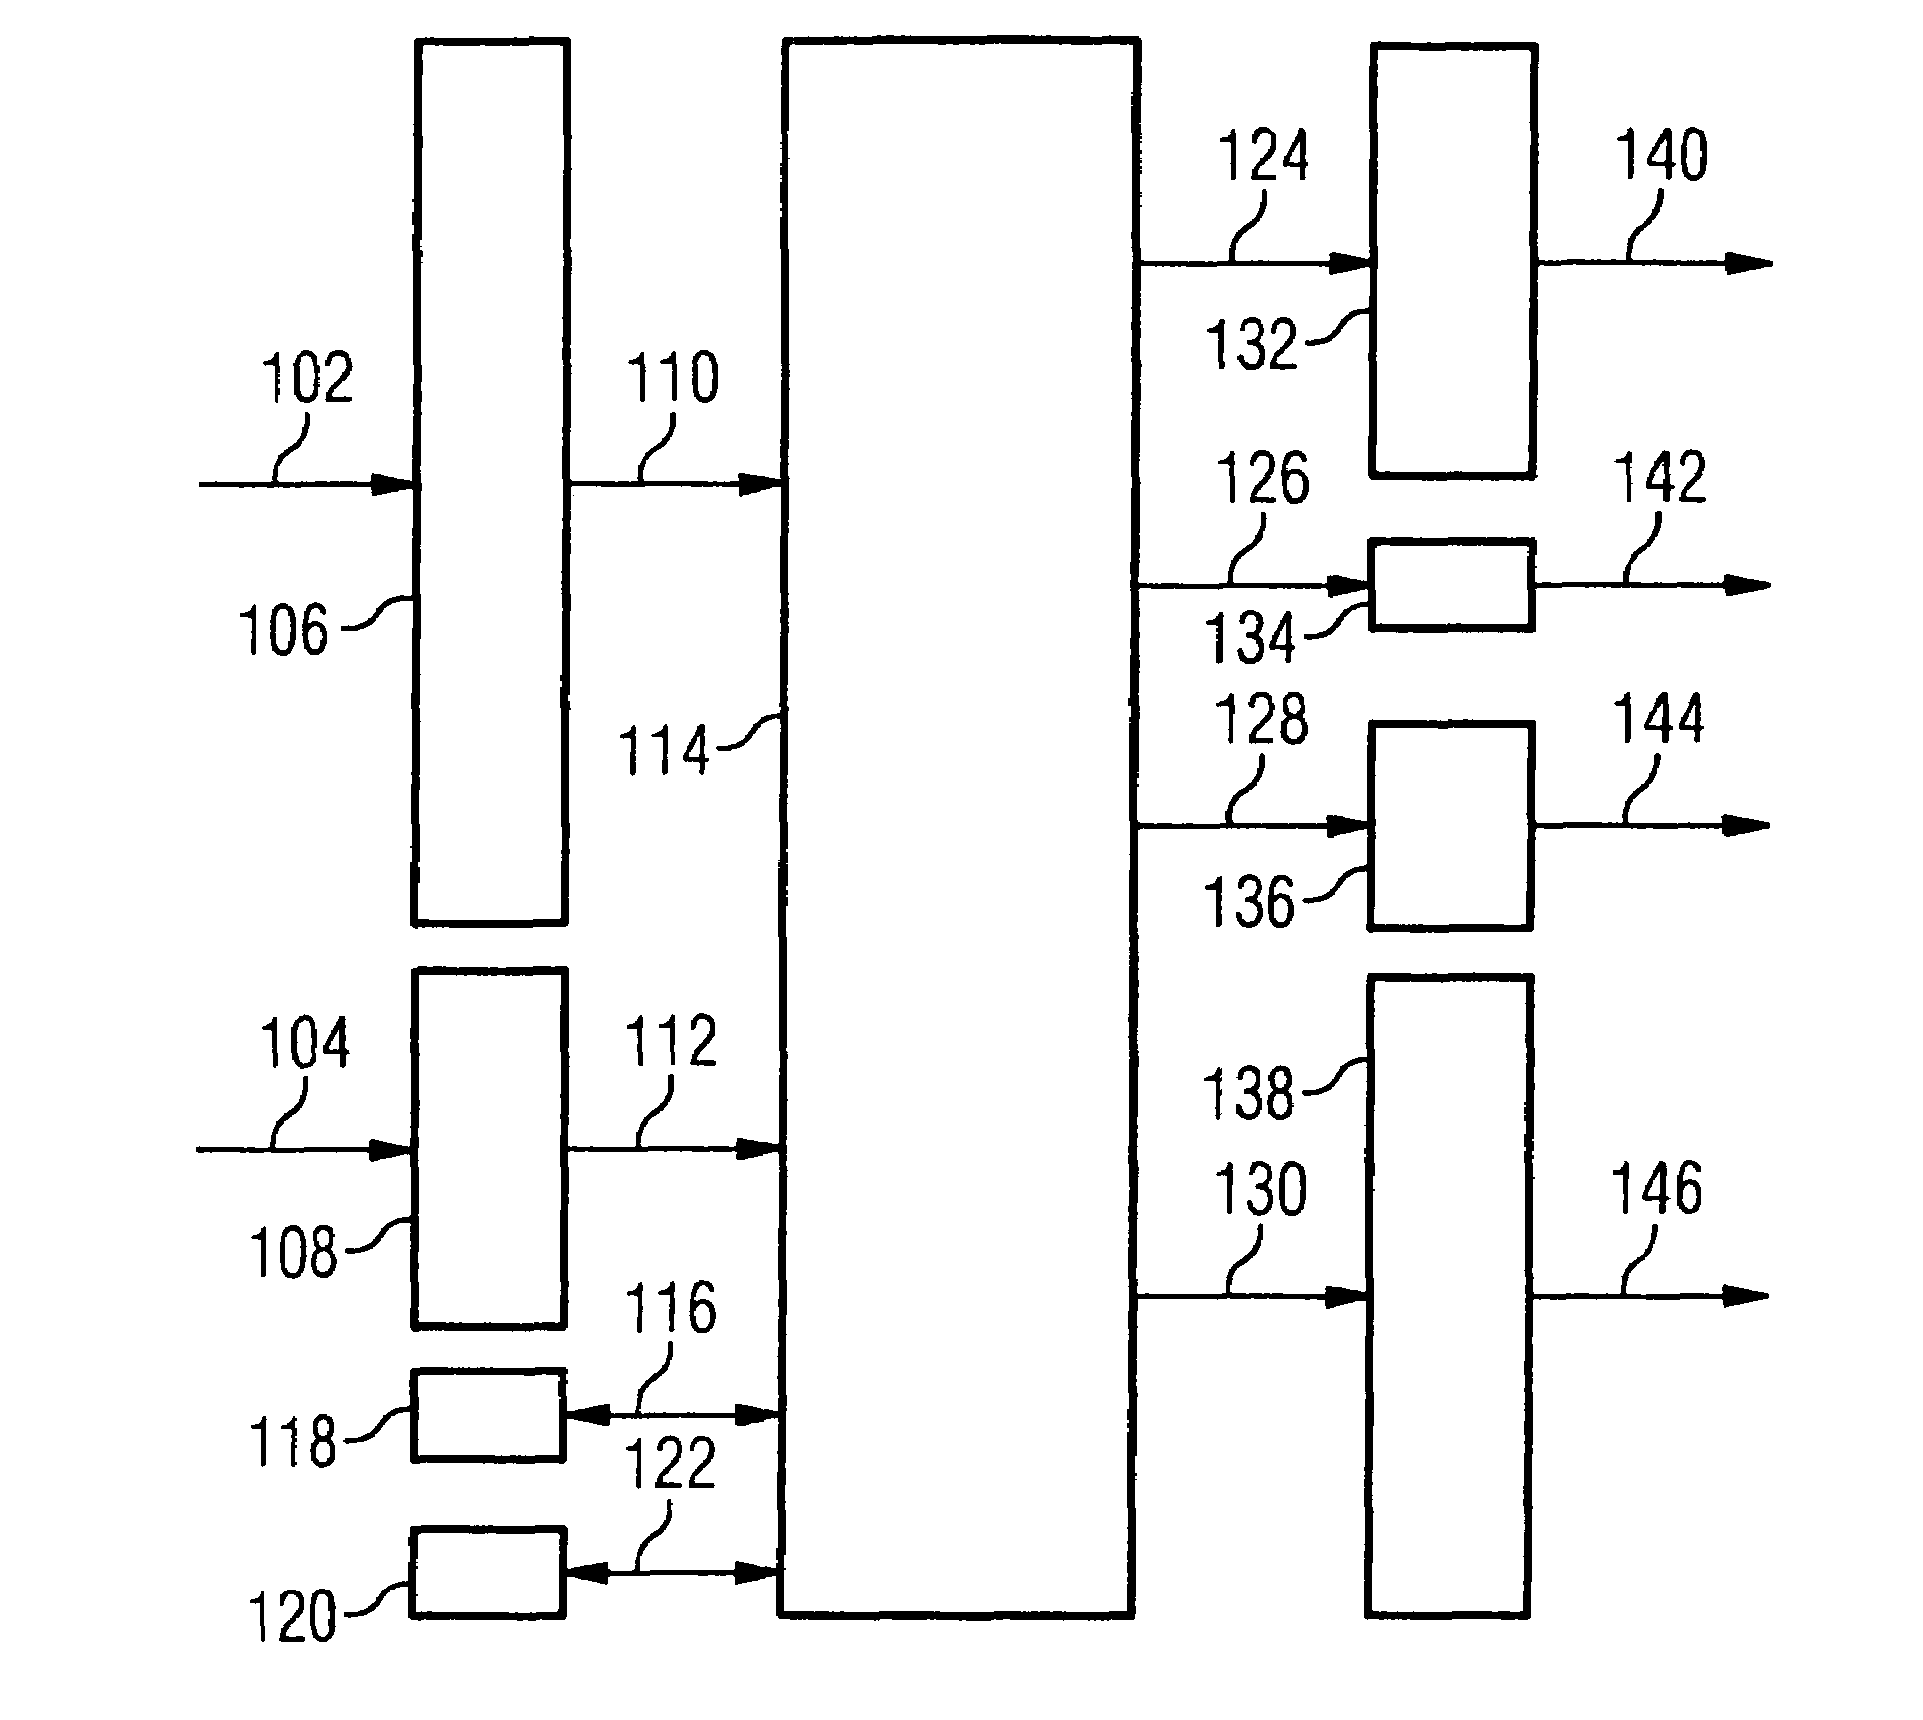 Mechanism for interconnecting independent functionalities of an engine controller